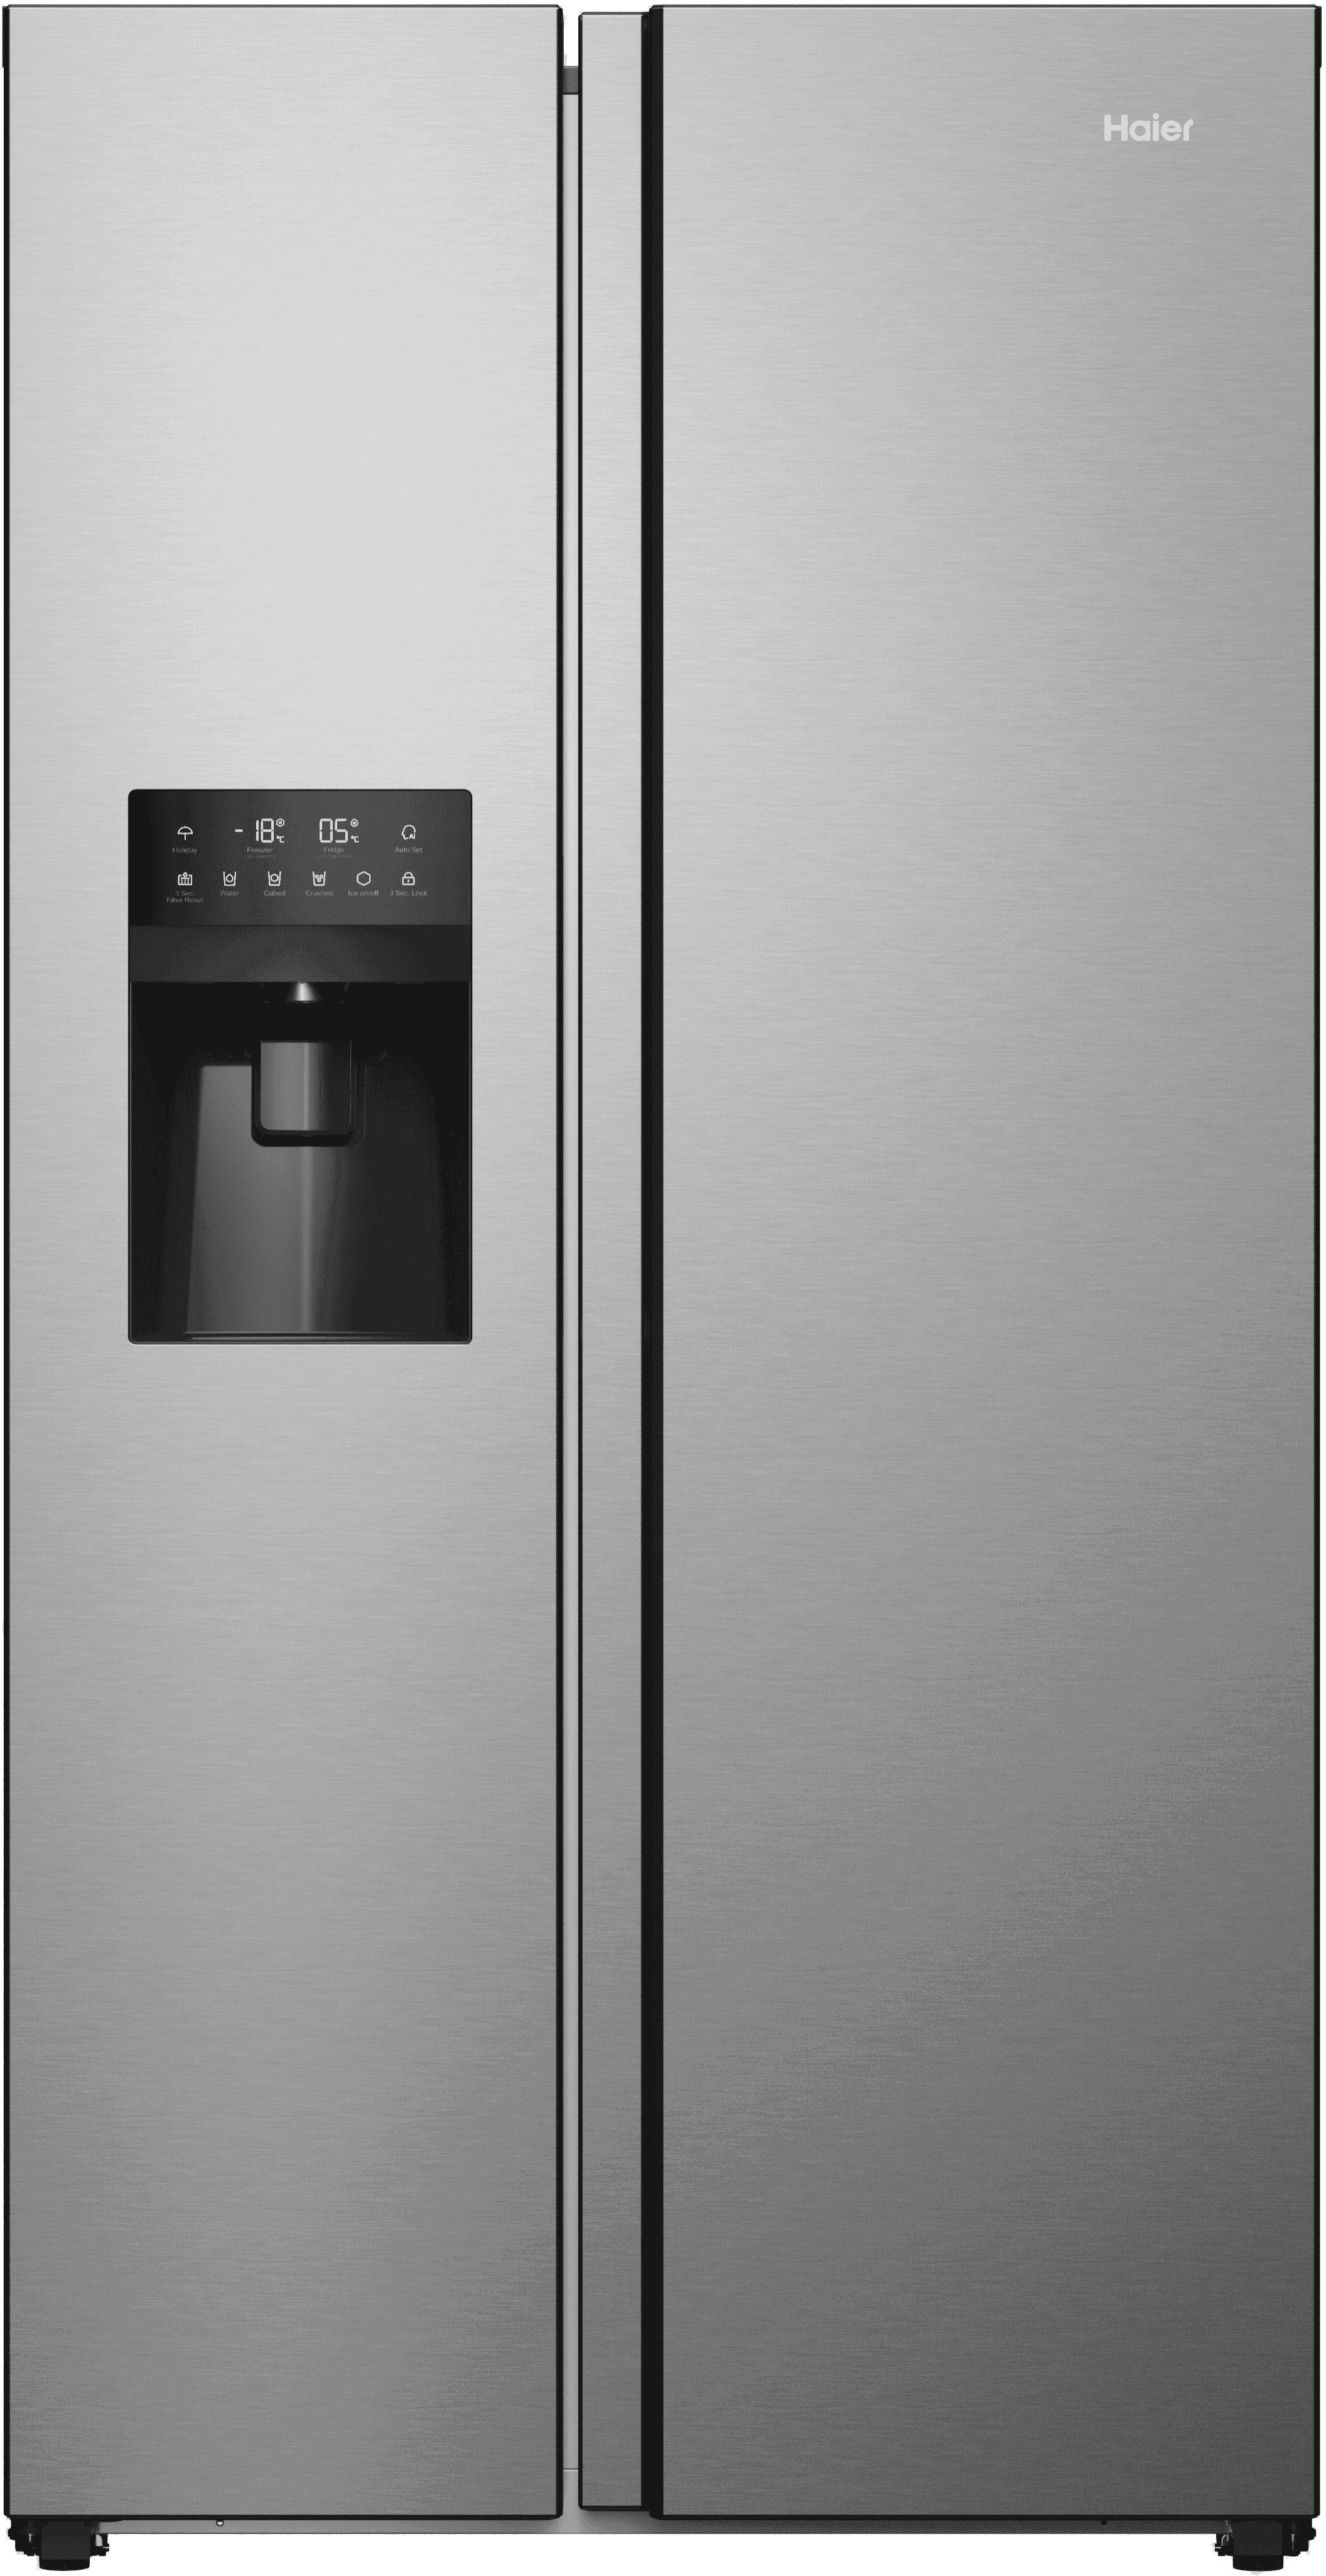 Haier SBS 90 Series 5 HSR5918DIMP Plumbed Frost Free American Fridge Freezer - Stainless Steel - D Rated, Stainless Steel